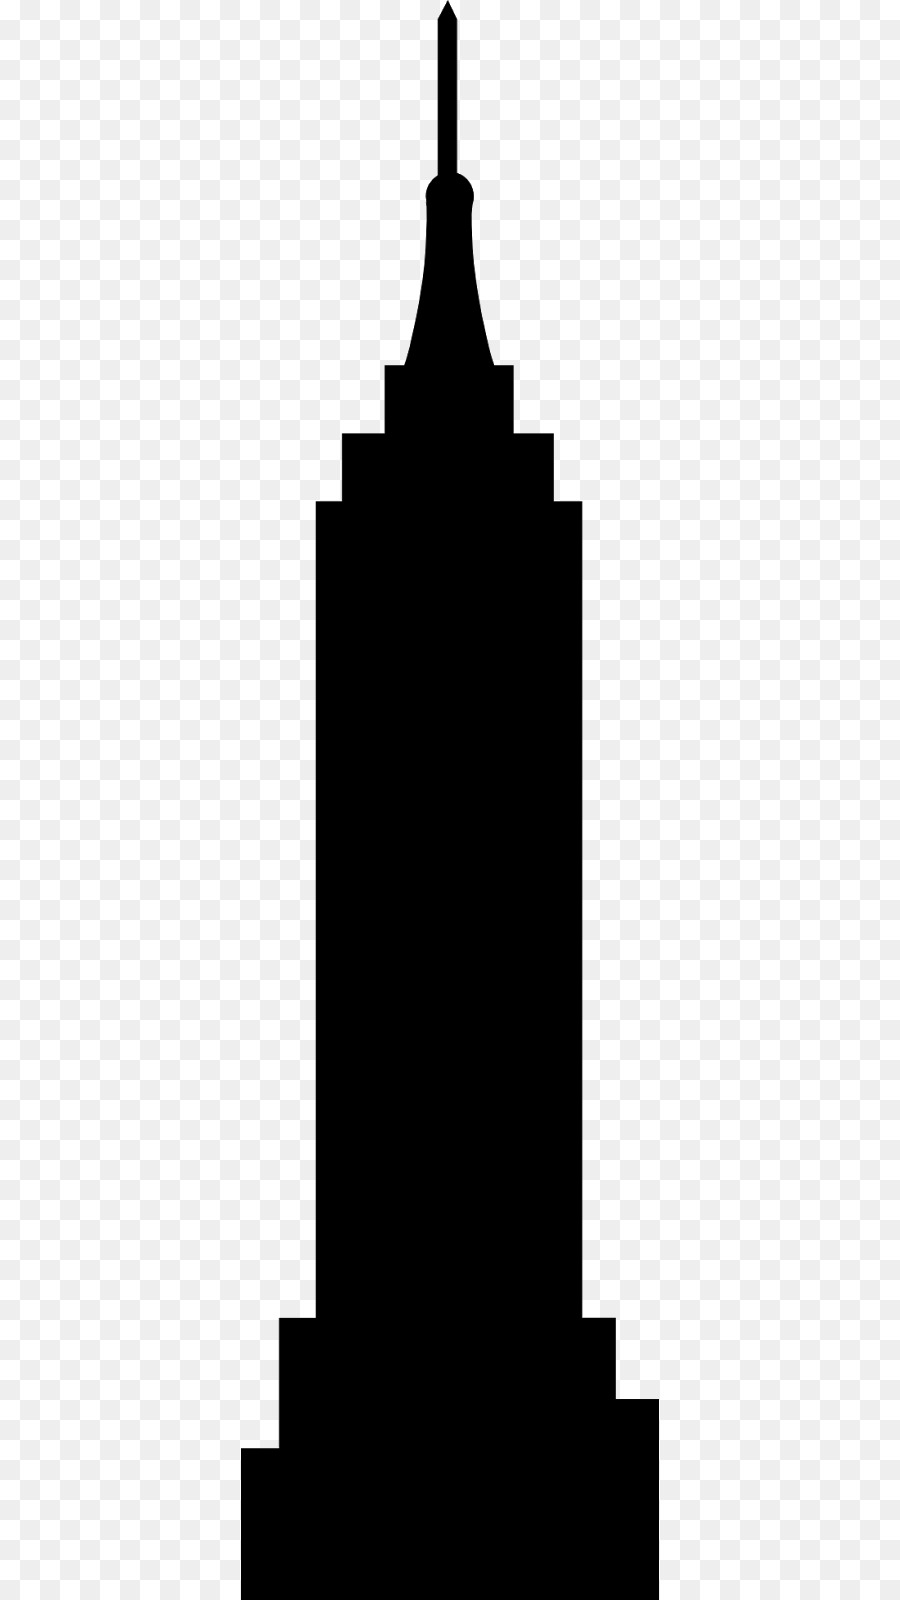 Empire State Building Silhouette Clip art - empire state buildin png download - 418*1600 - Free Transparent Empire State Building png Download.